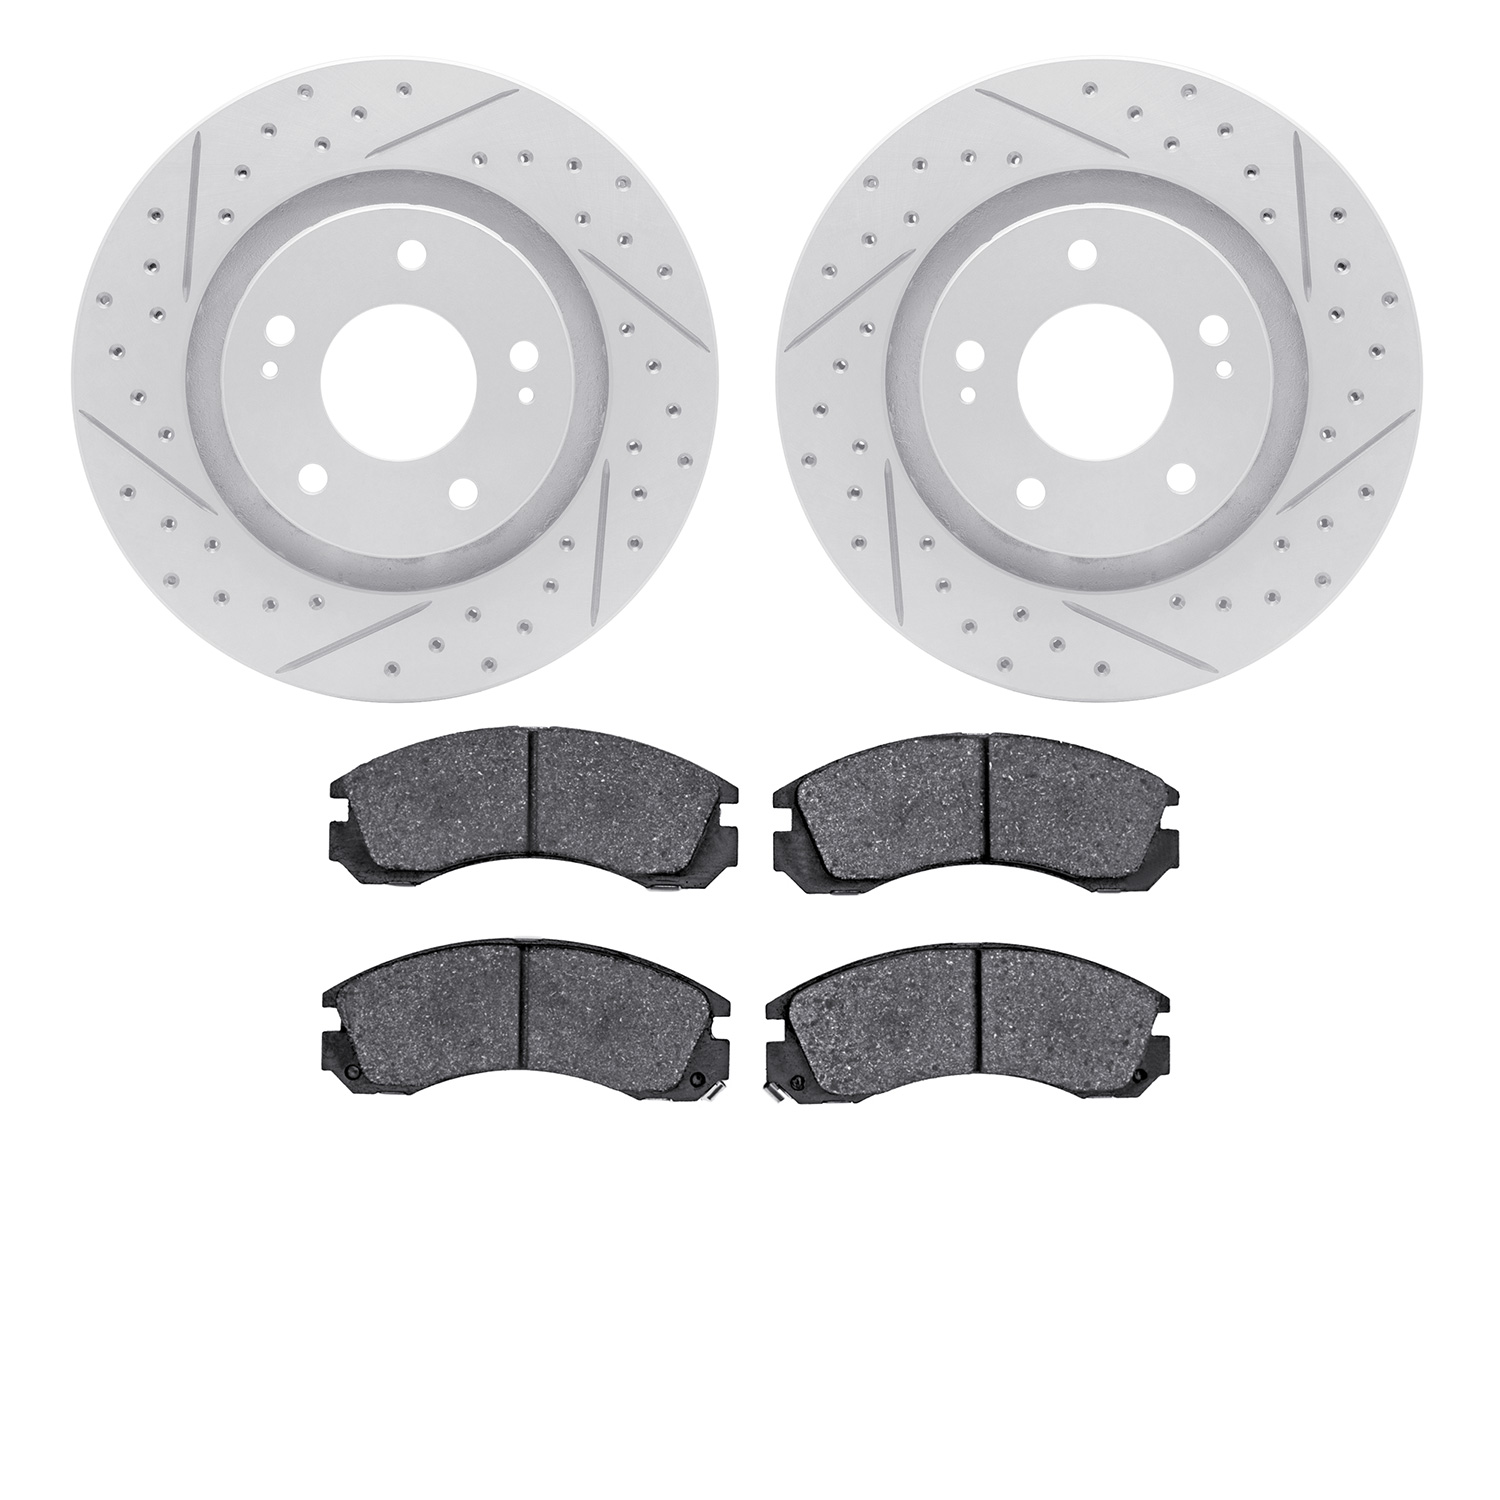 2502-72045 Geoperformance Drilled/Slotted Rotors w/5000 Advanced Brake Pads Kit, Fits Select Mitsubishi, Position: Front